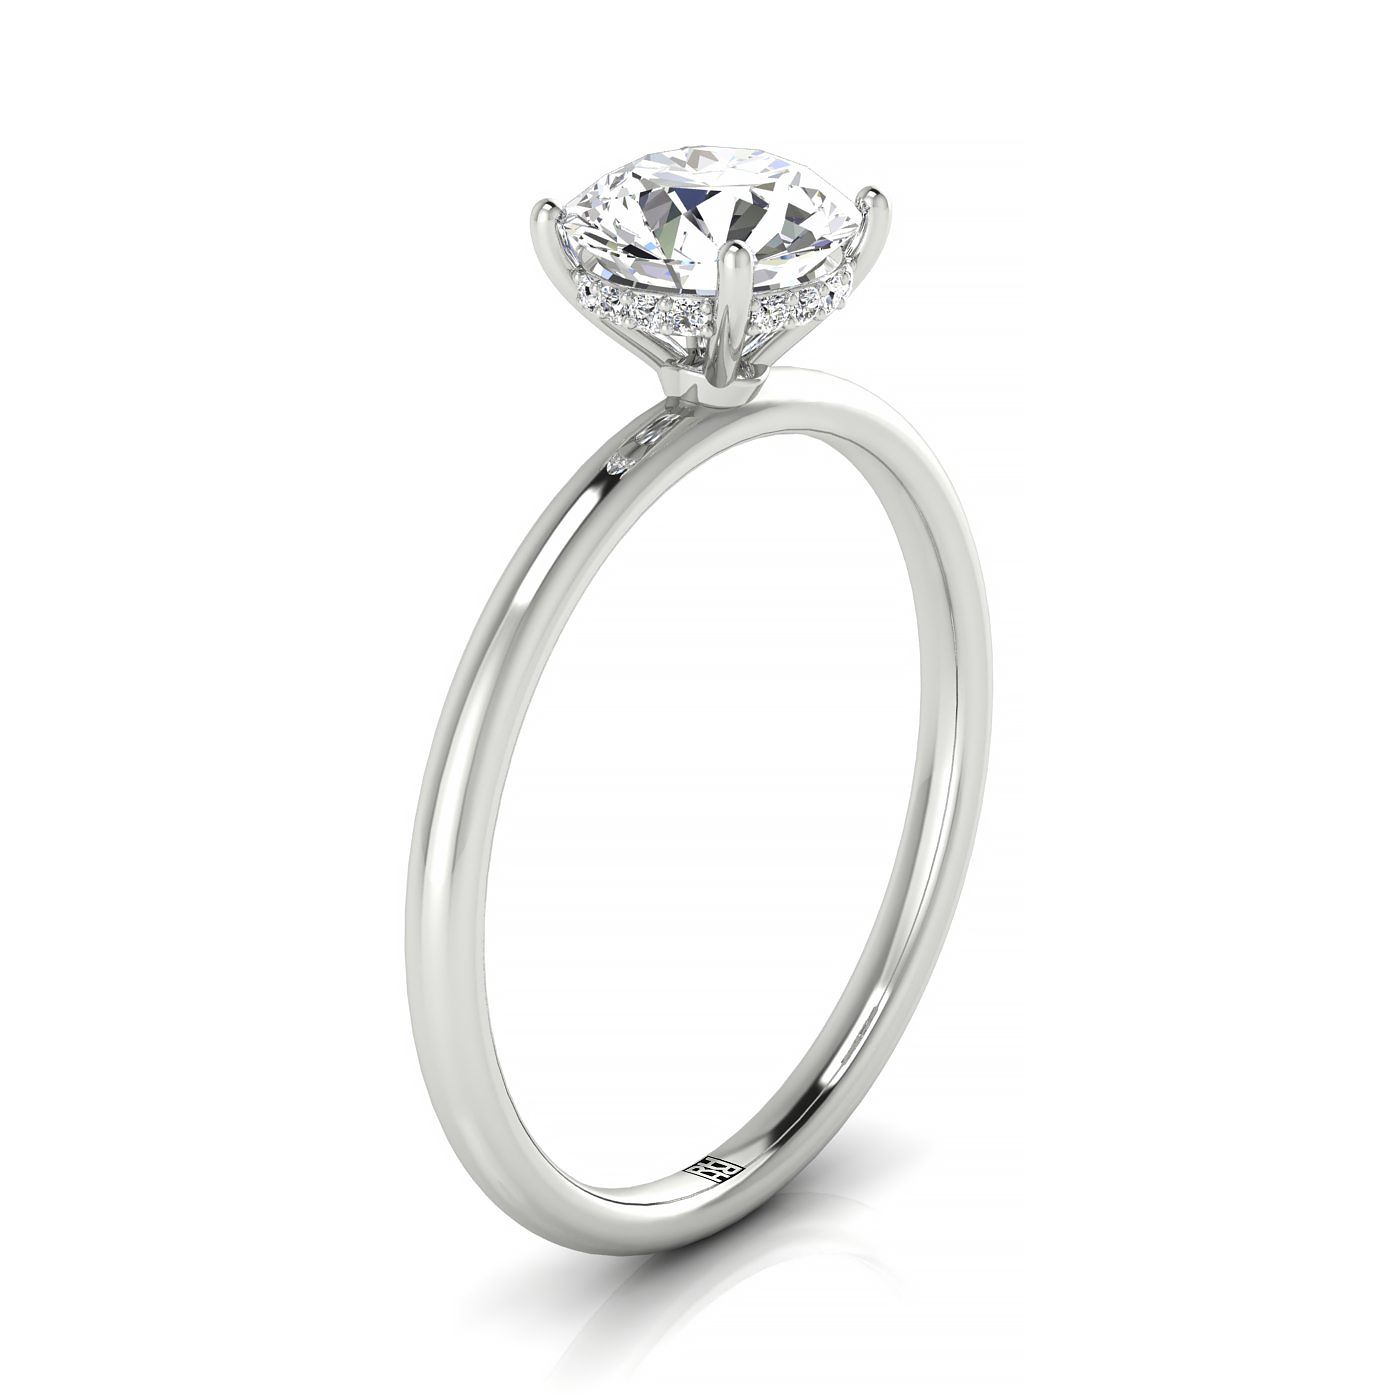 Plat Round Solitaire Engagement Ring With Upper Hidden Halo With 16 Prong Set Round Diamonds